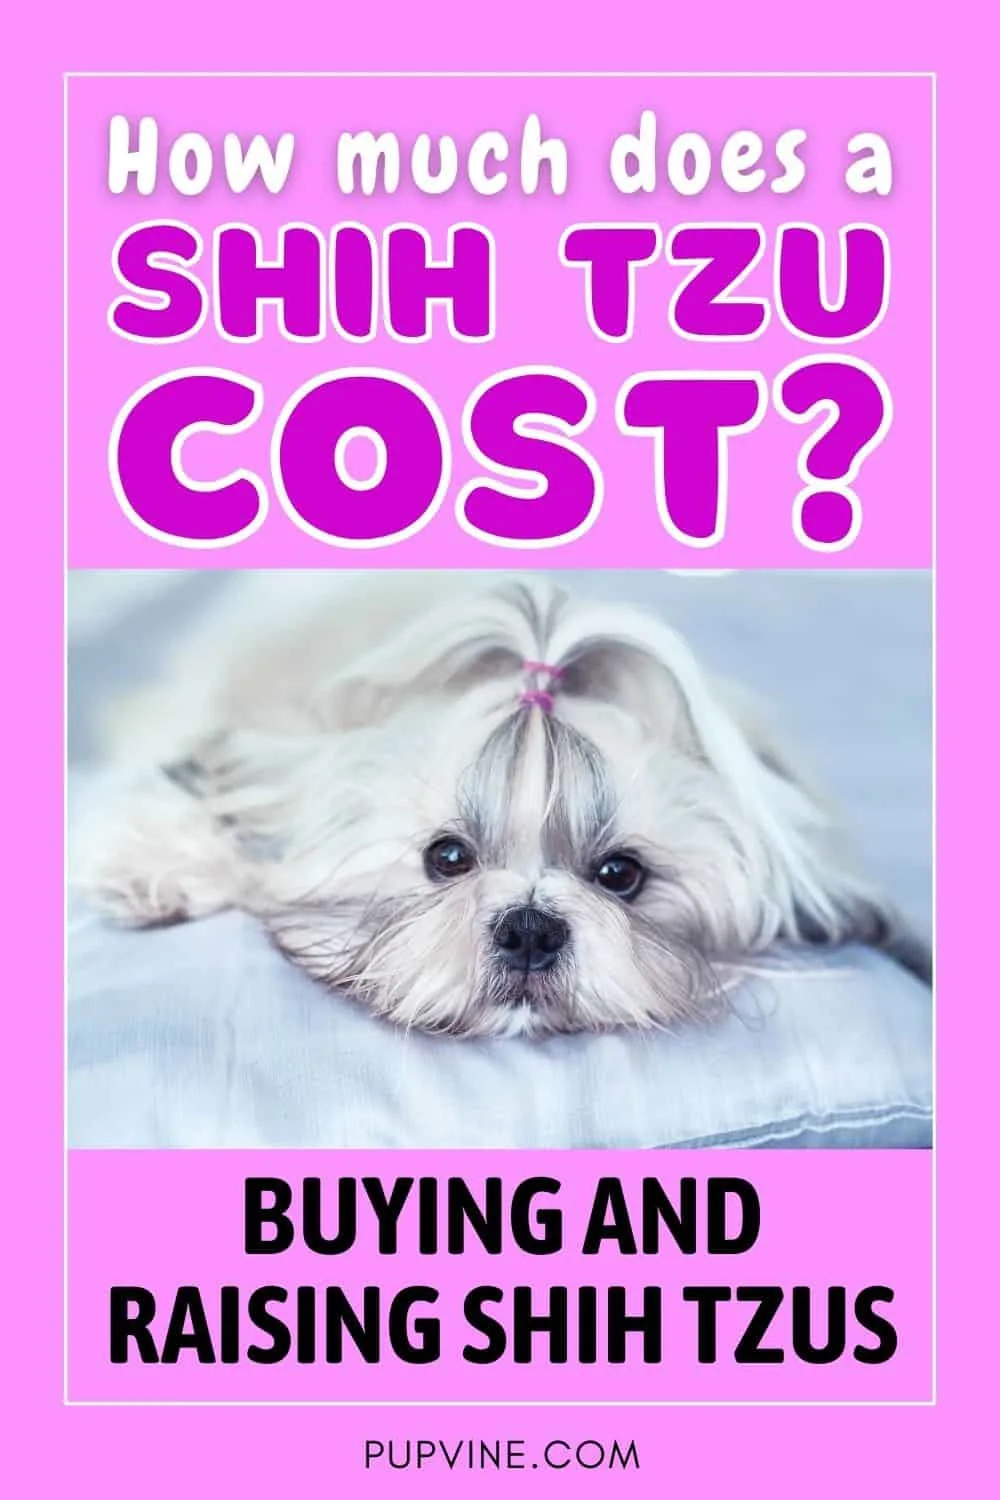 How Much Does A Shih Tzu Cost_ Buying And Raising Shih Tzus 